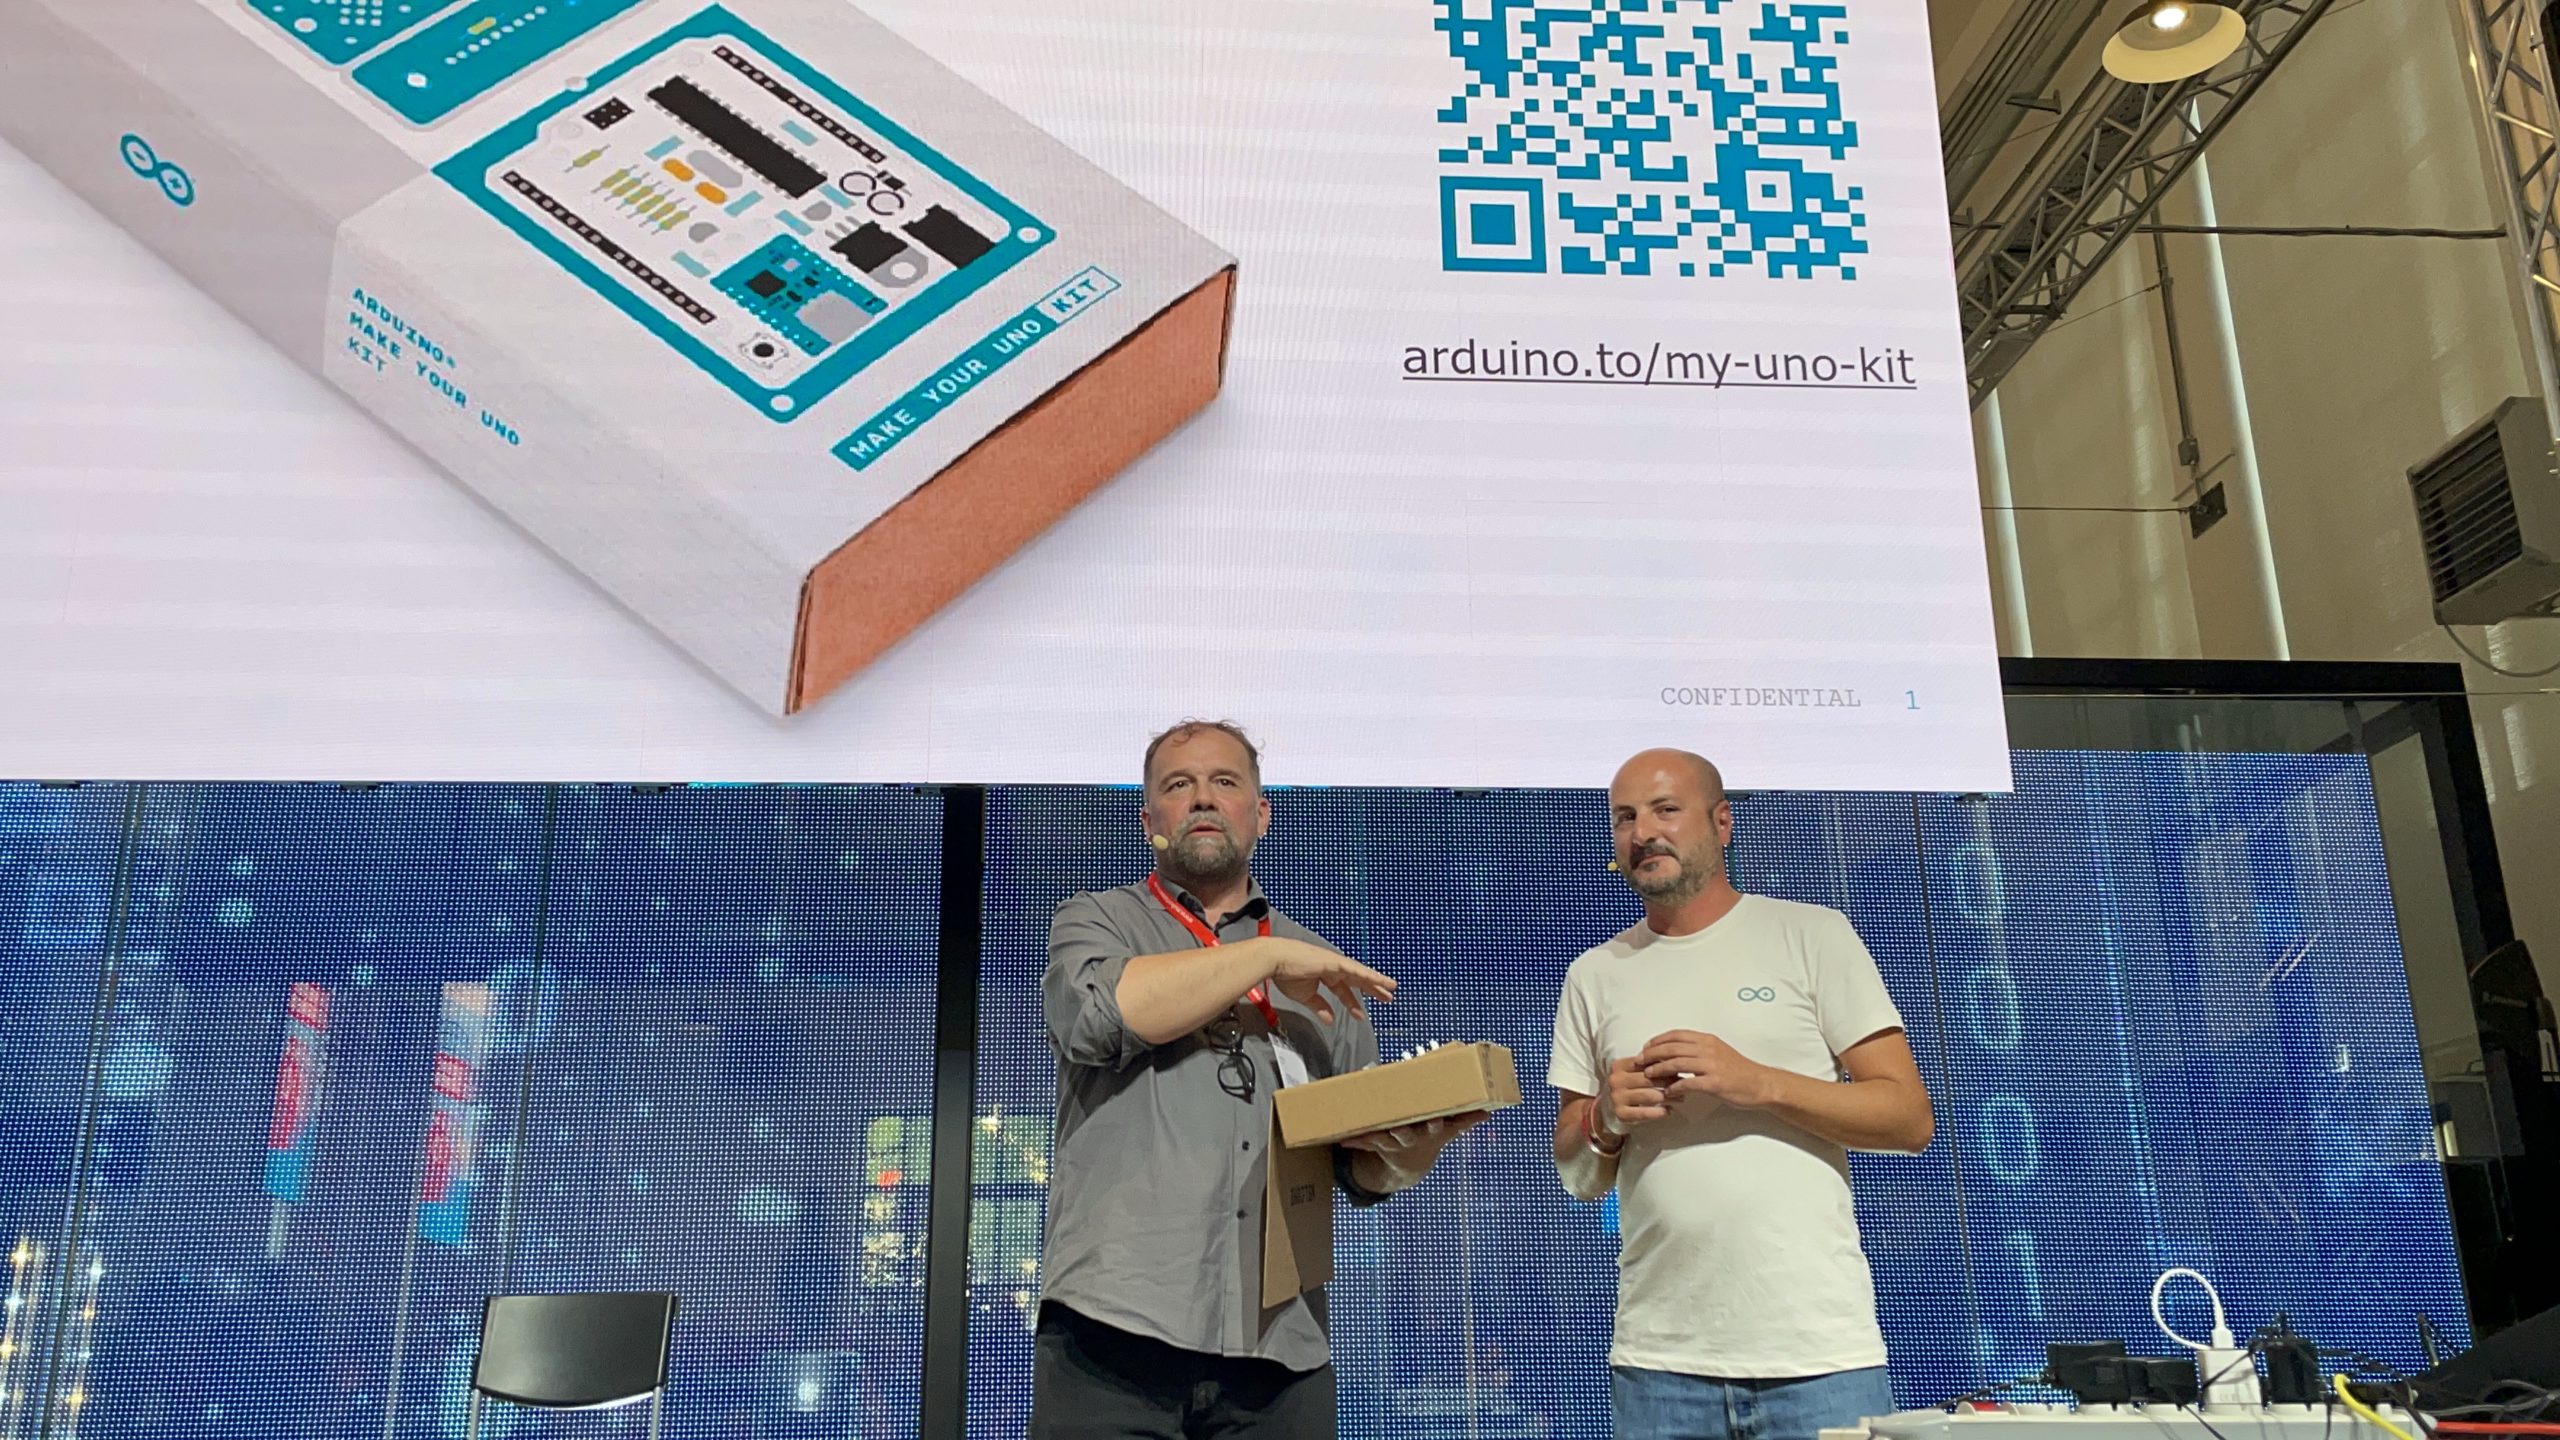 Arduino Previews New DIY Kit at Maker Faire Rome